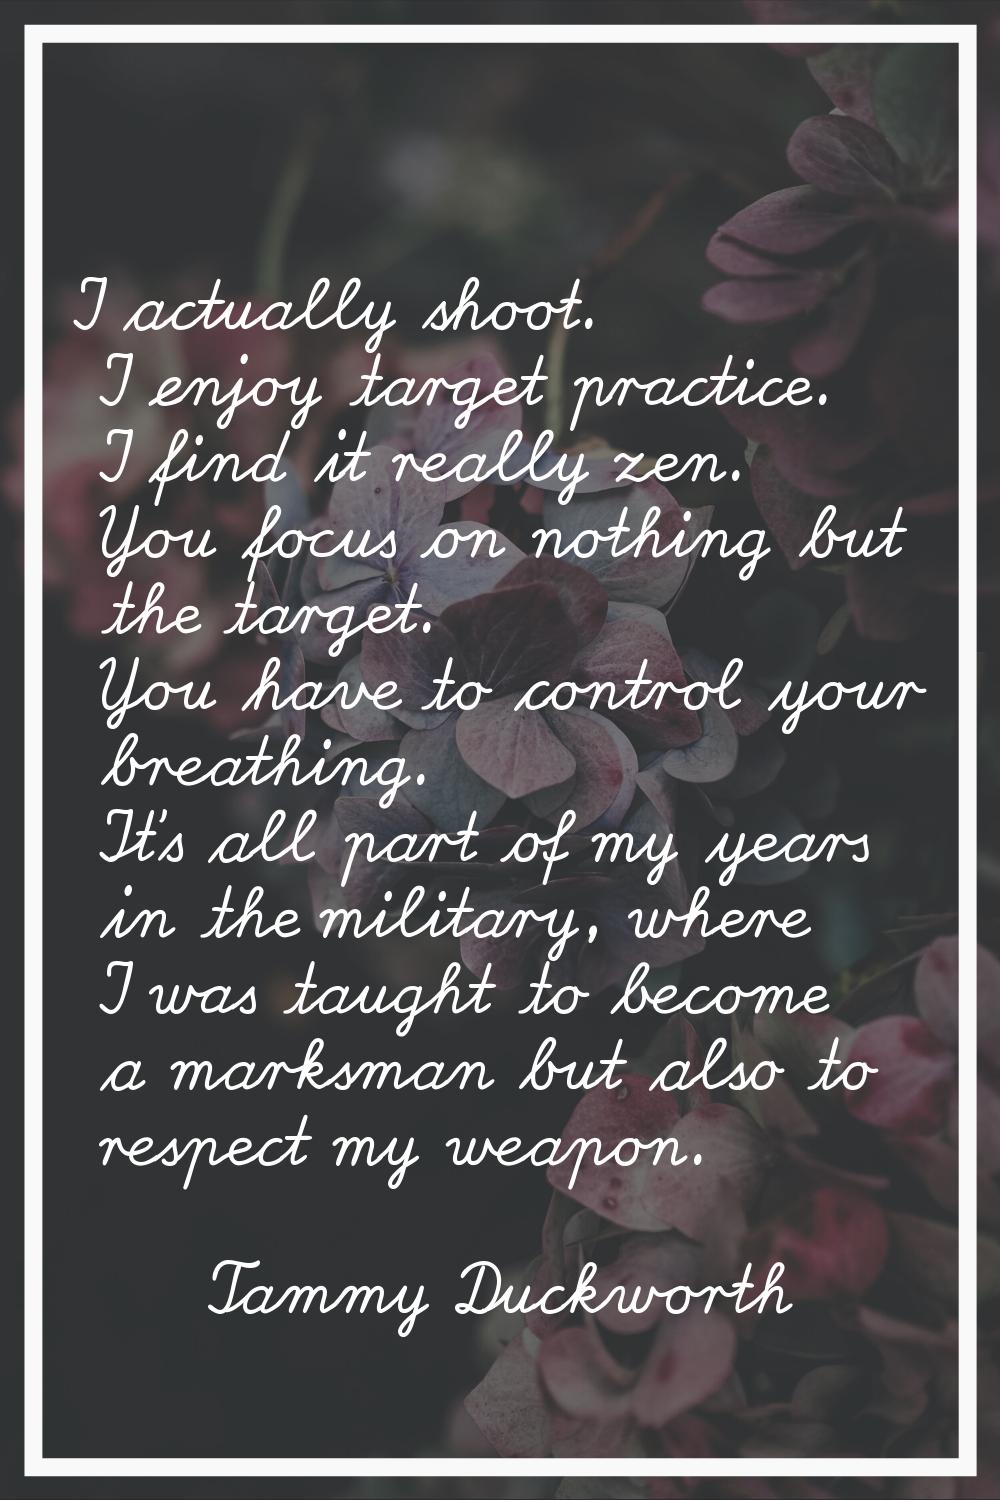 I actually shoot. I enjoy target practice. I find it really zen. You focus on nothing but the targe